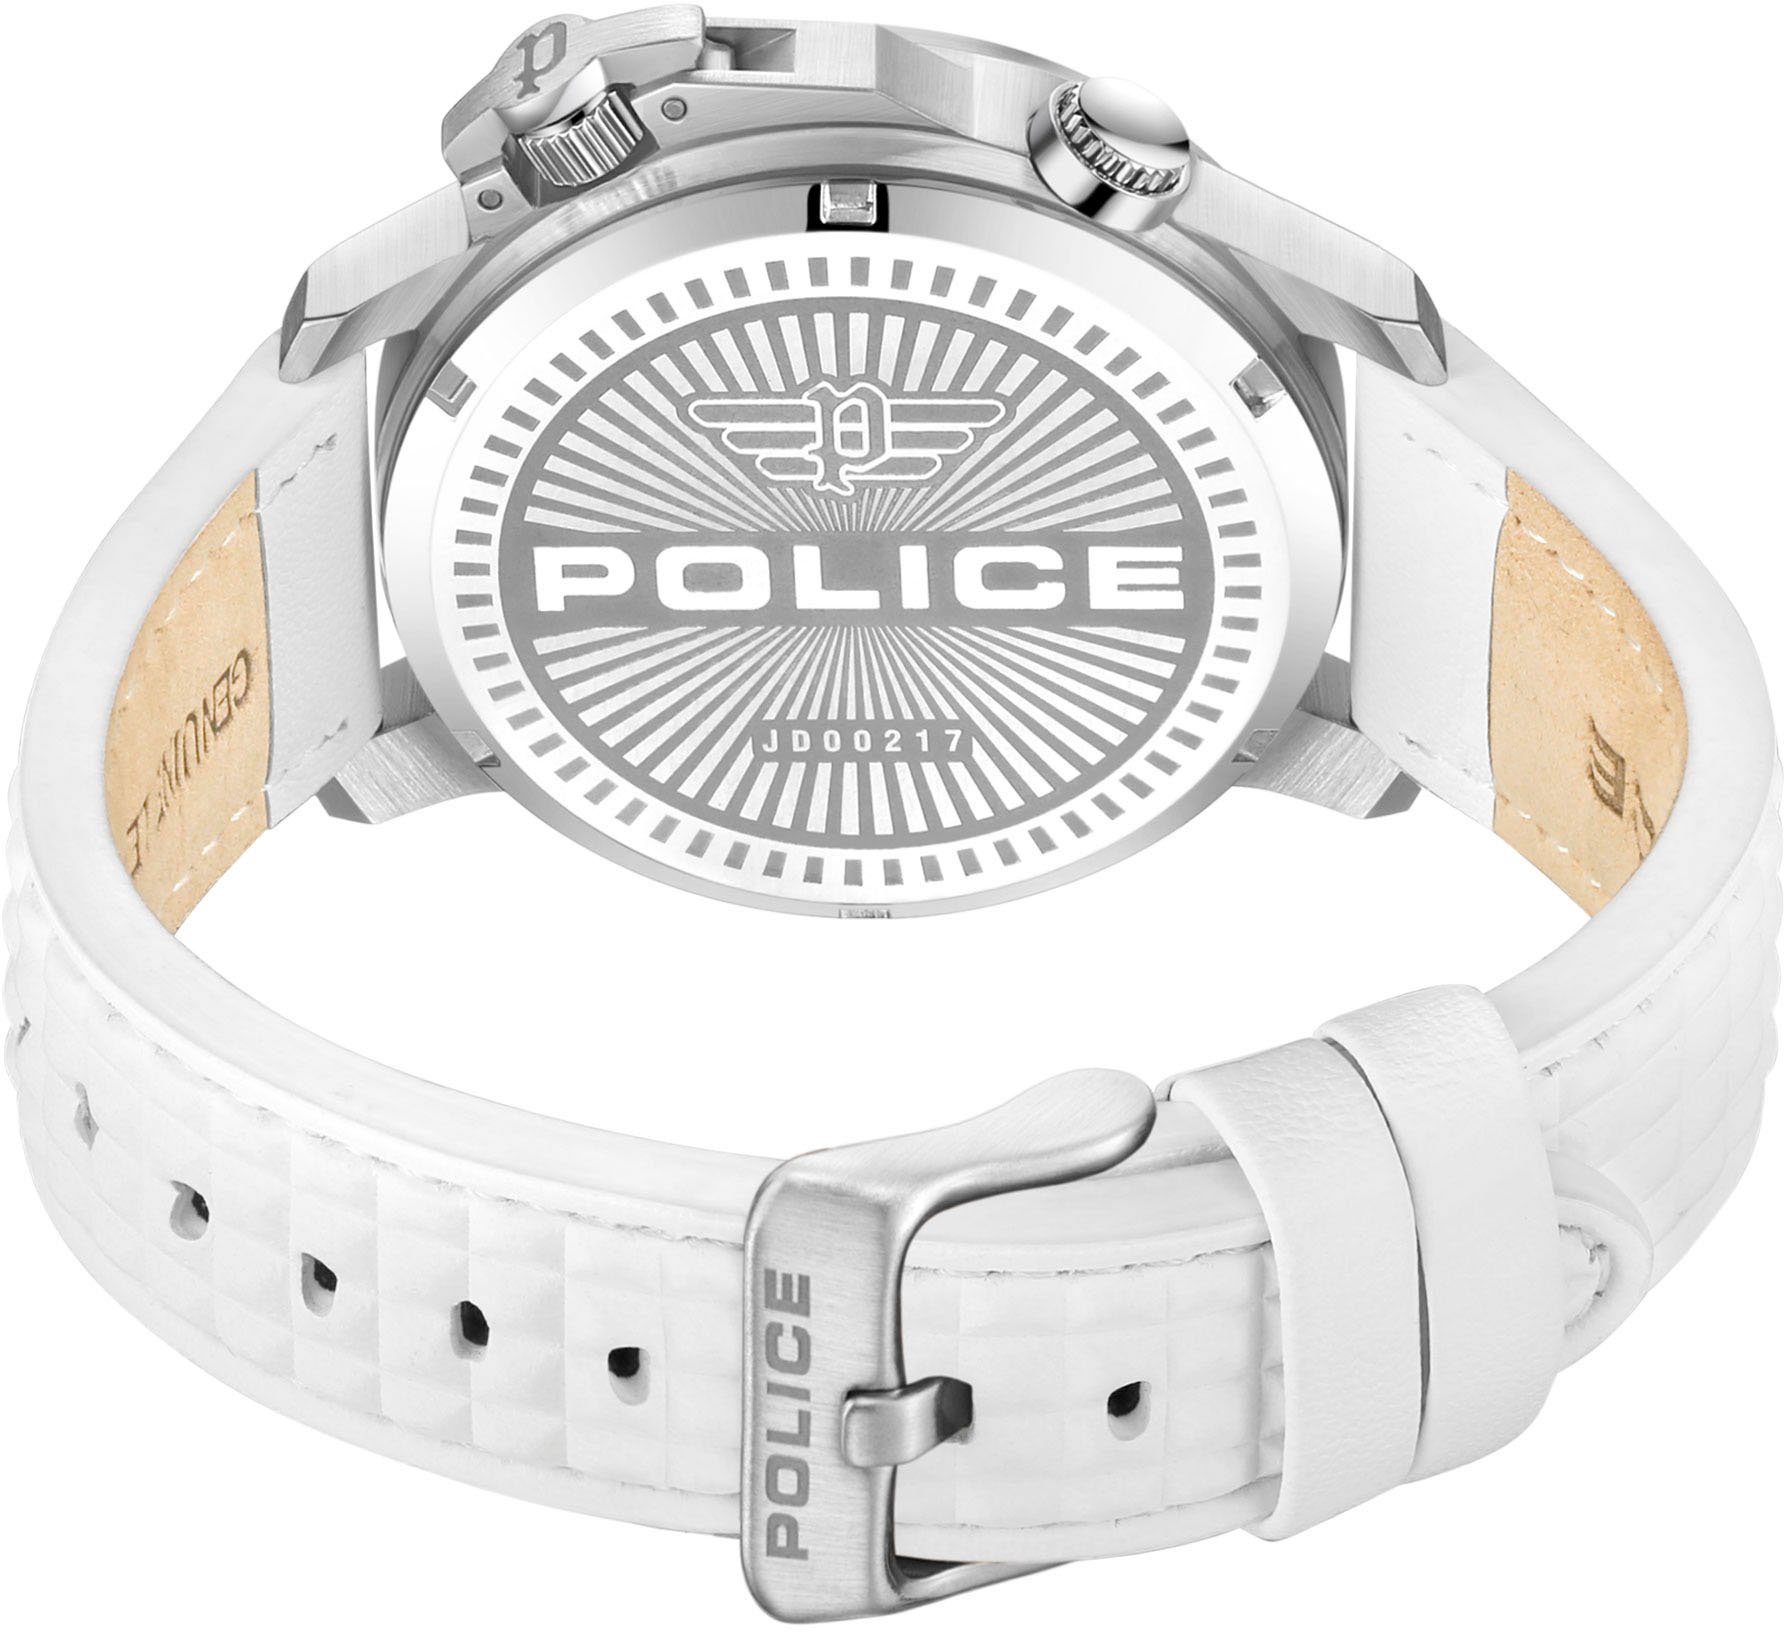 Automatikuhr PEWJD0021704 Weiss Police AUTOMATED,